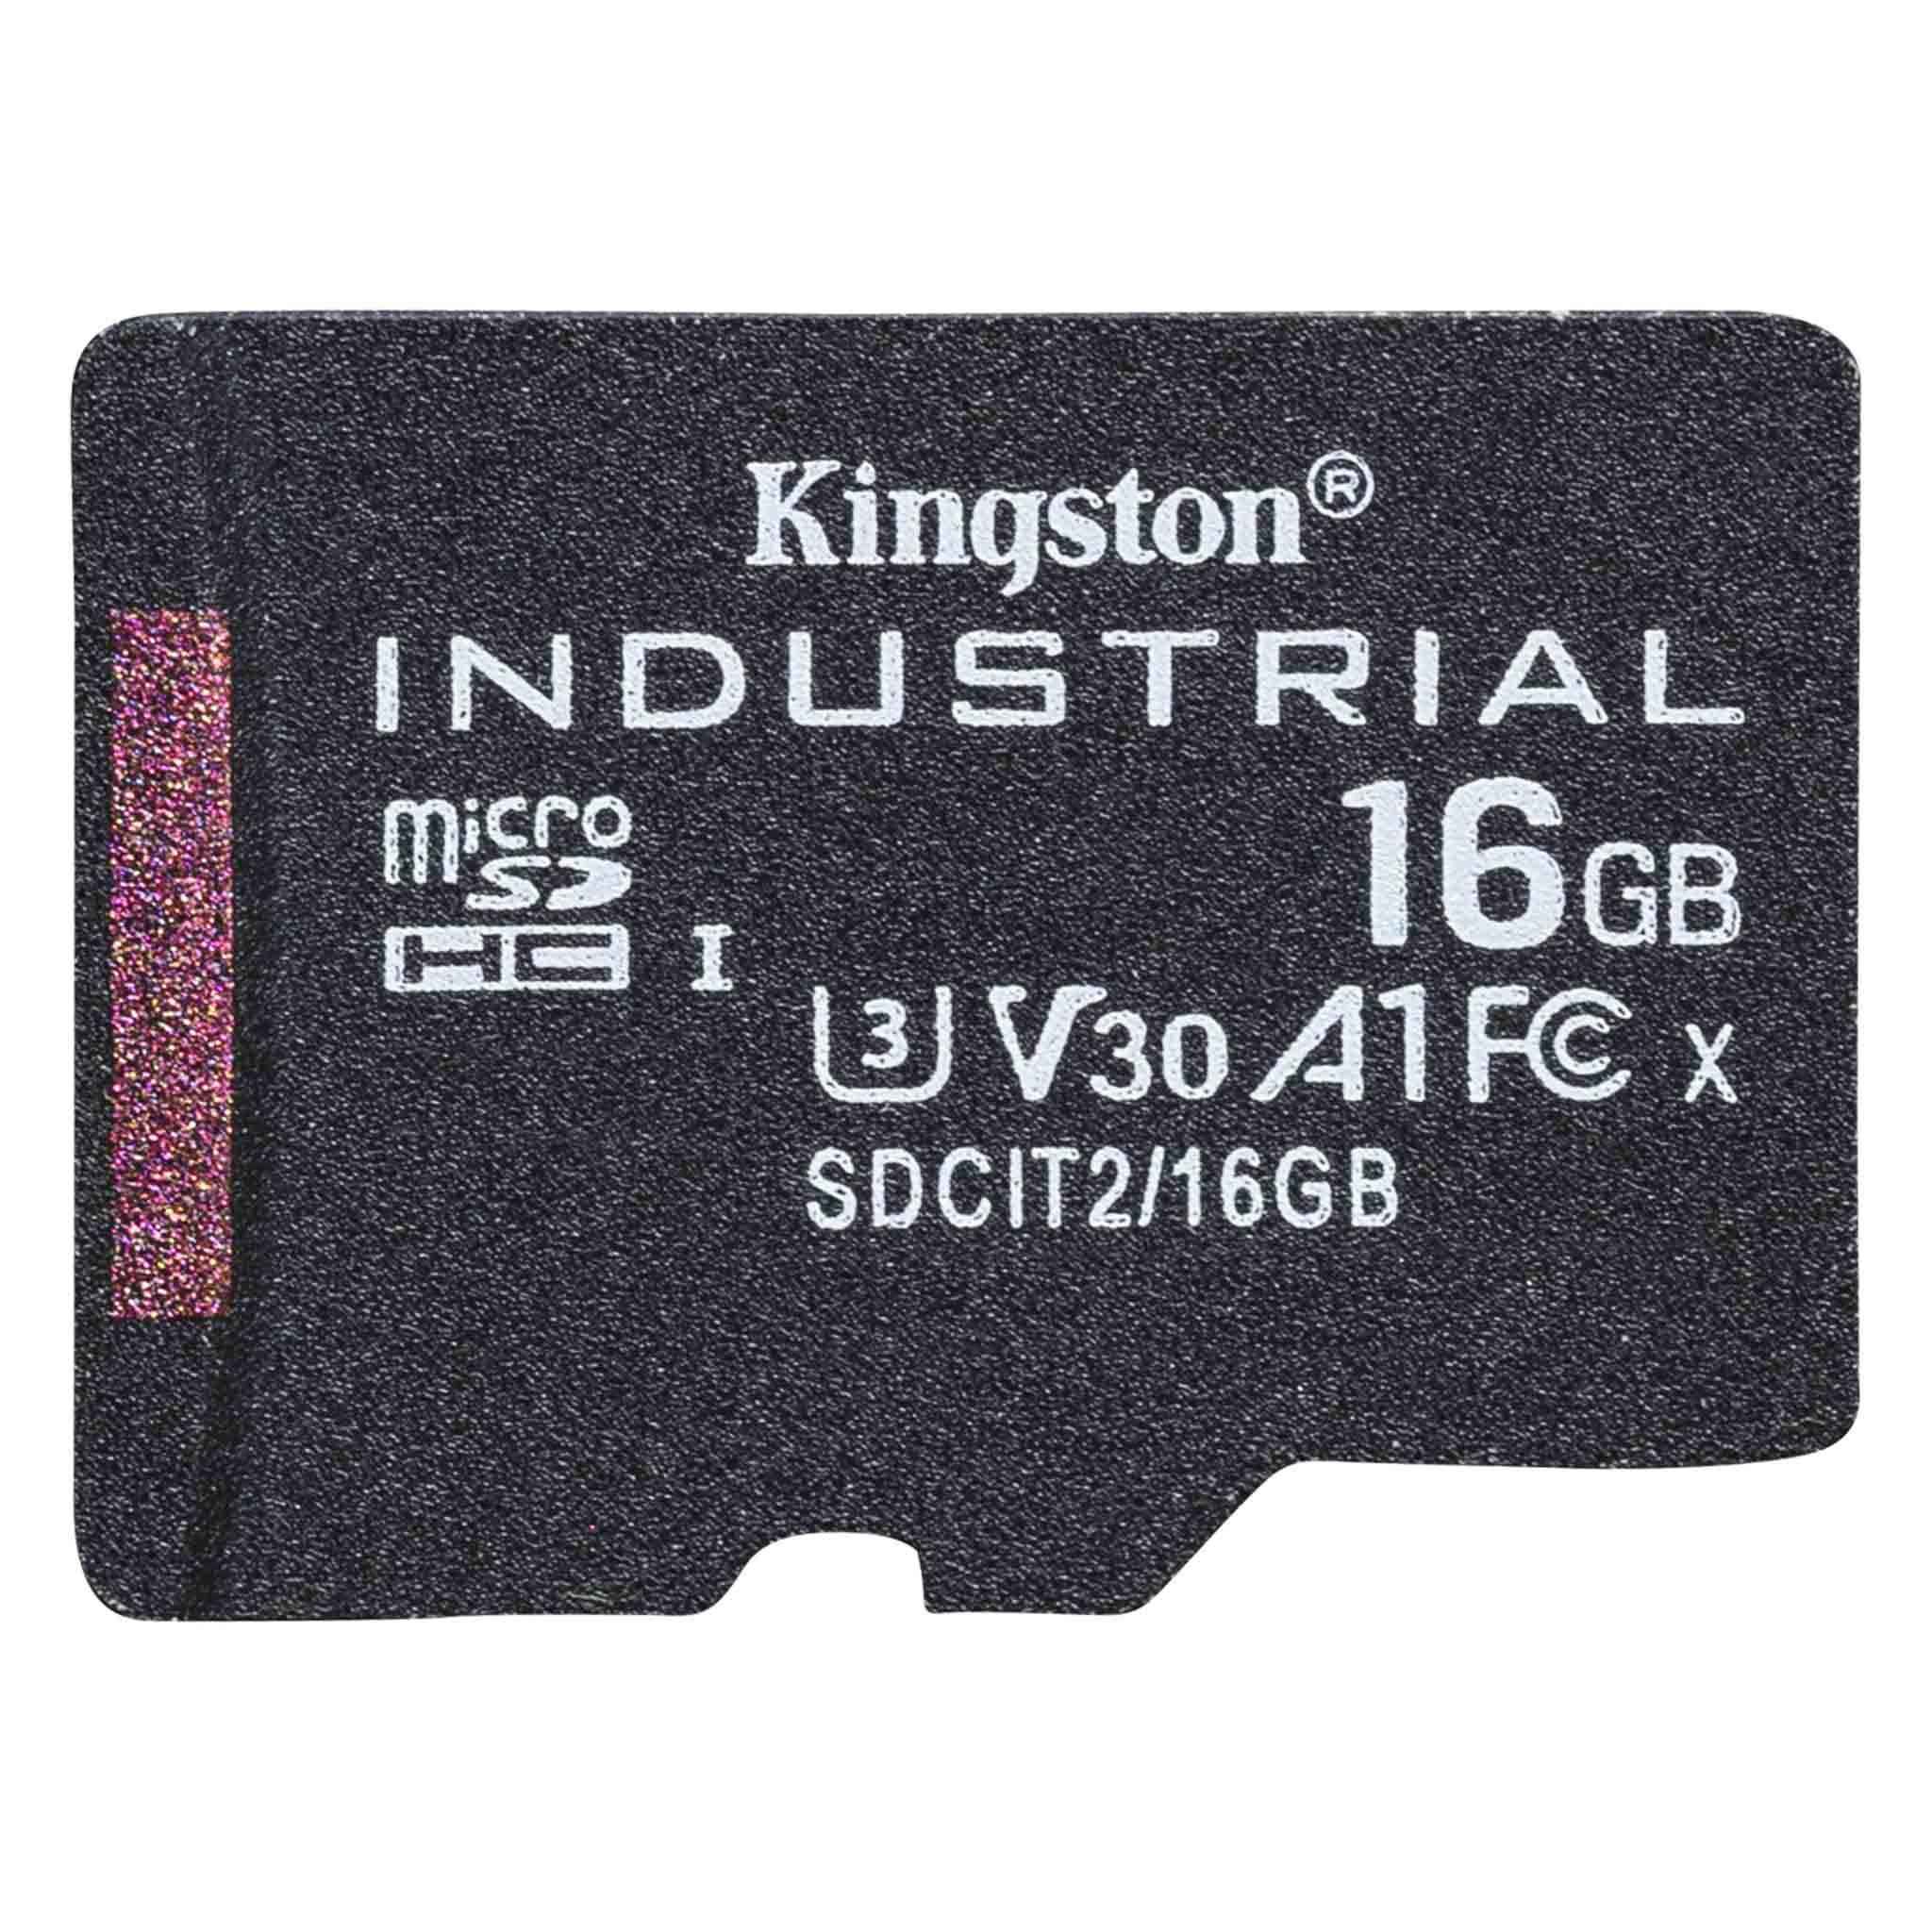 90MBs Works for Kingston Kingston Industrial Grade 16GB Verykool i123 MicroSDHC Card Verified by SanFlash.